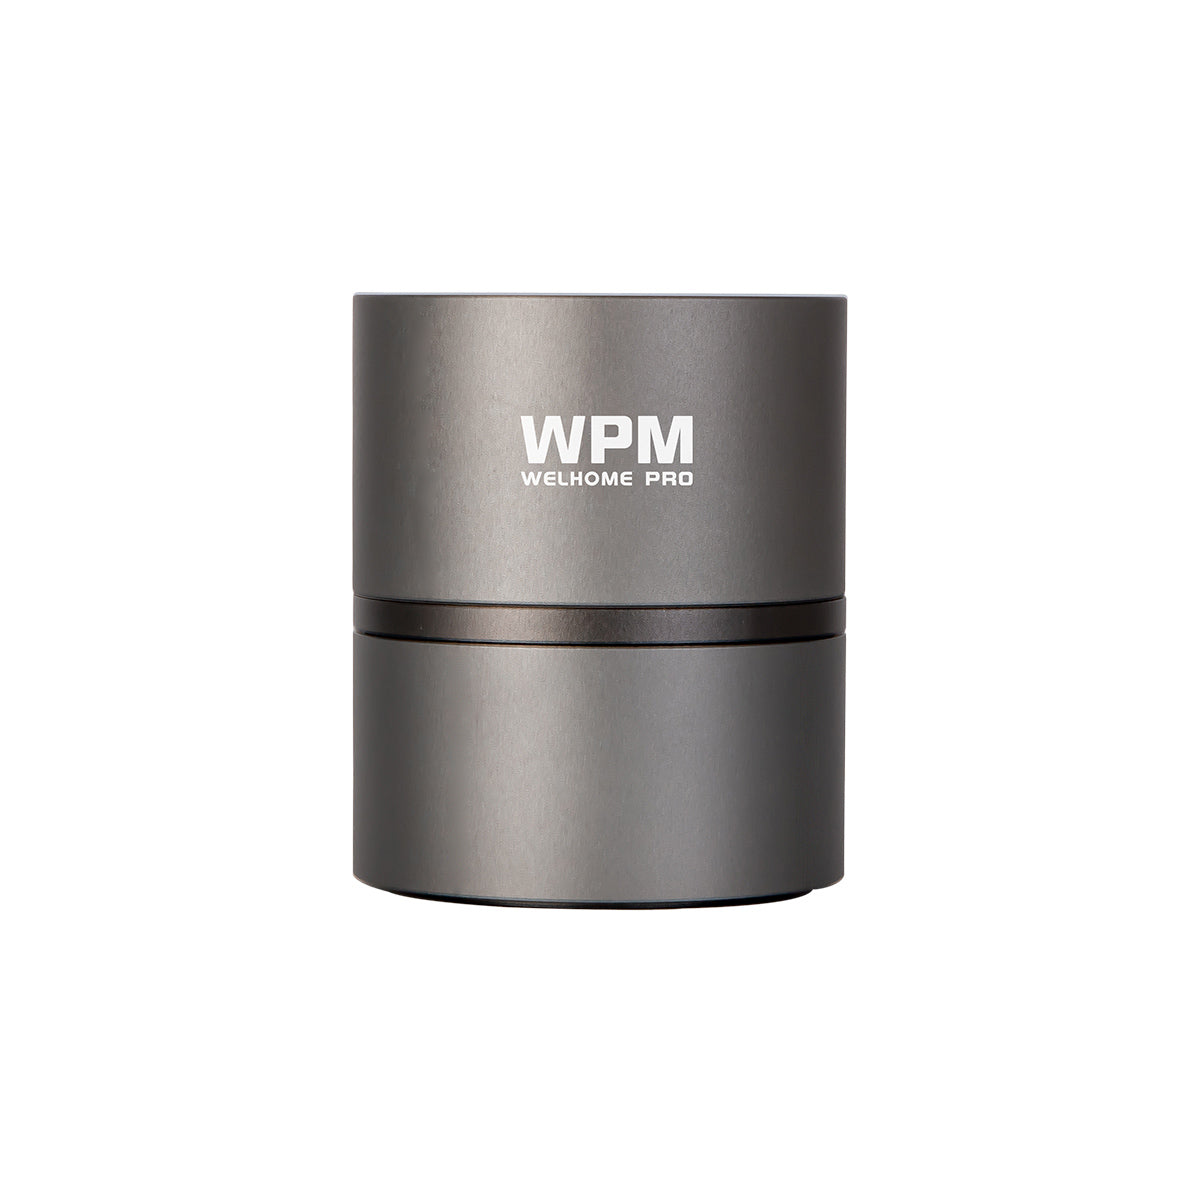 WPM ESPCUP (Sifter)